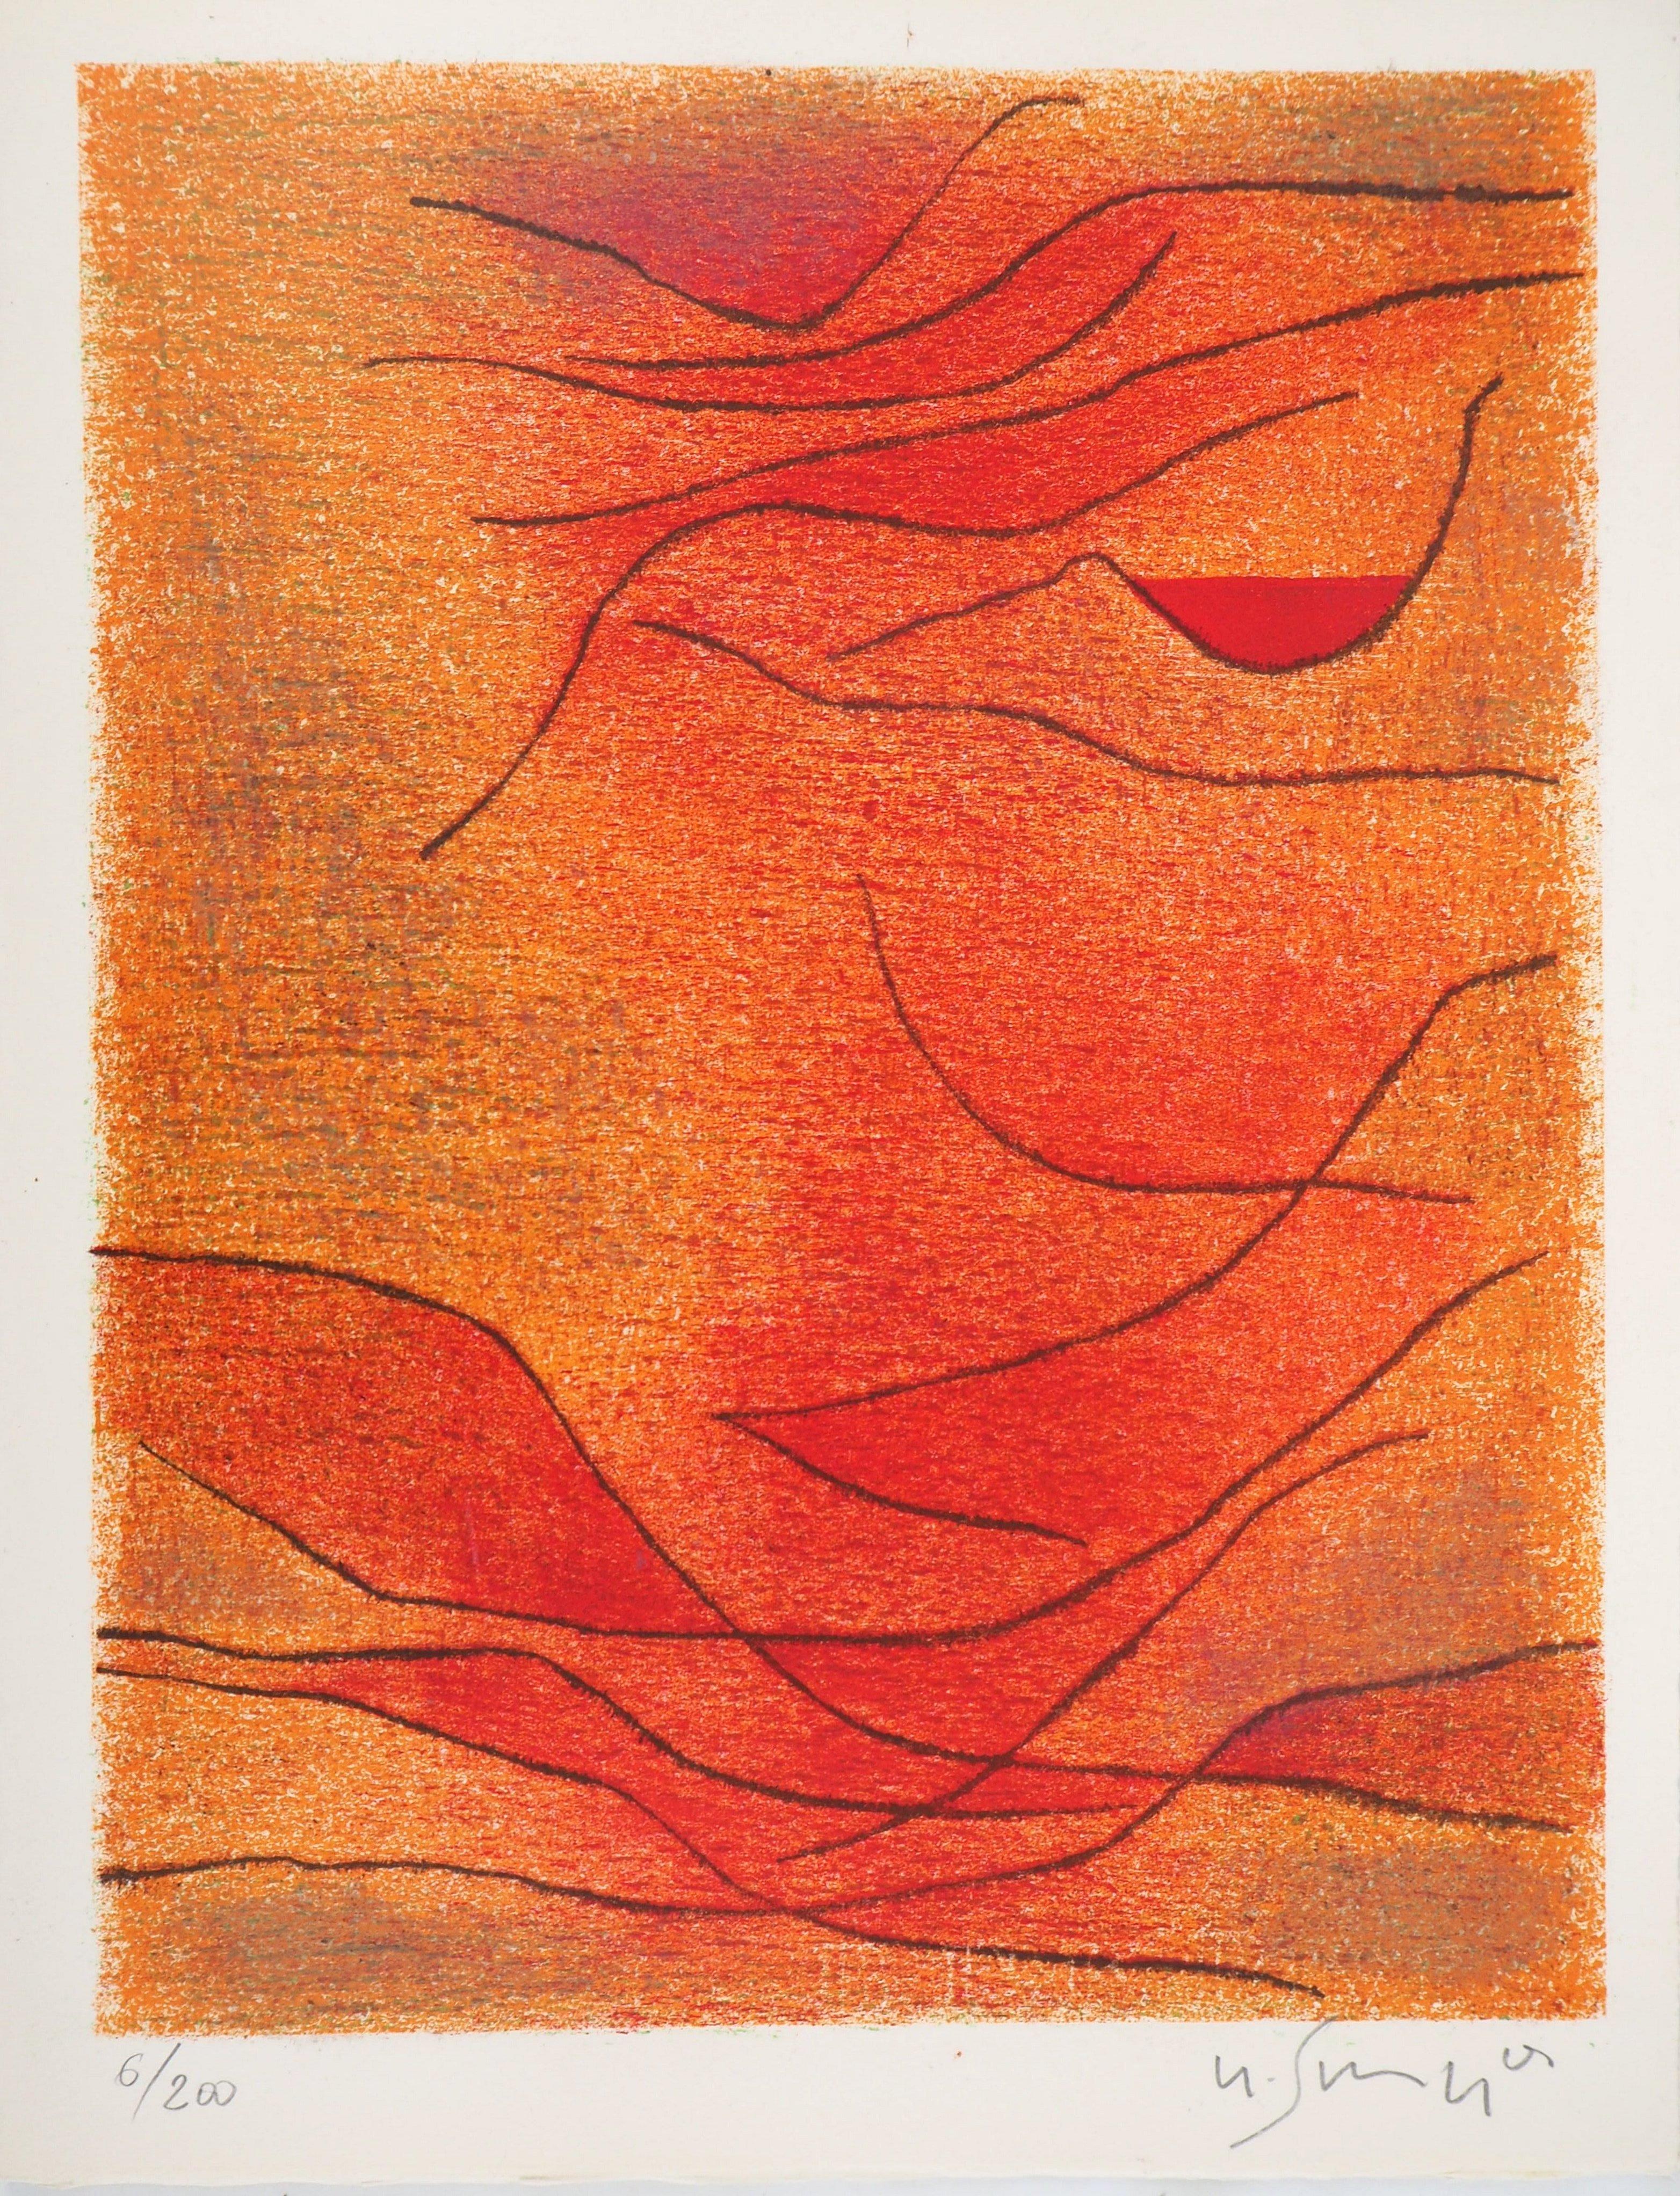 Gustave Singier Abstract Print – Orange and Red Composition - Original lithograph by G. Singier - 1959